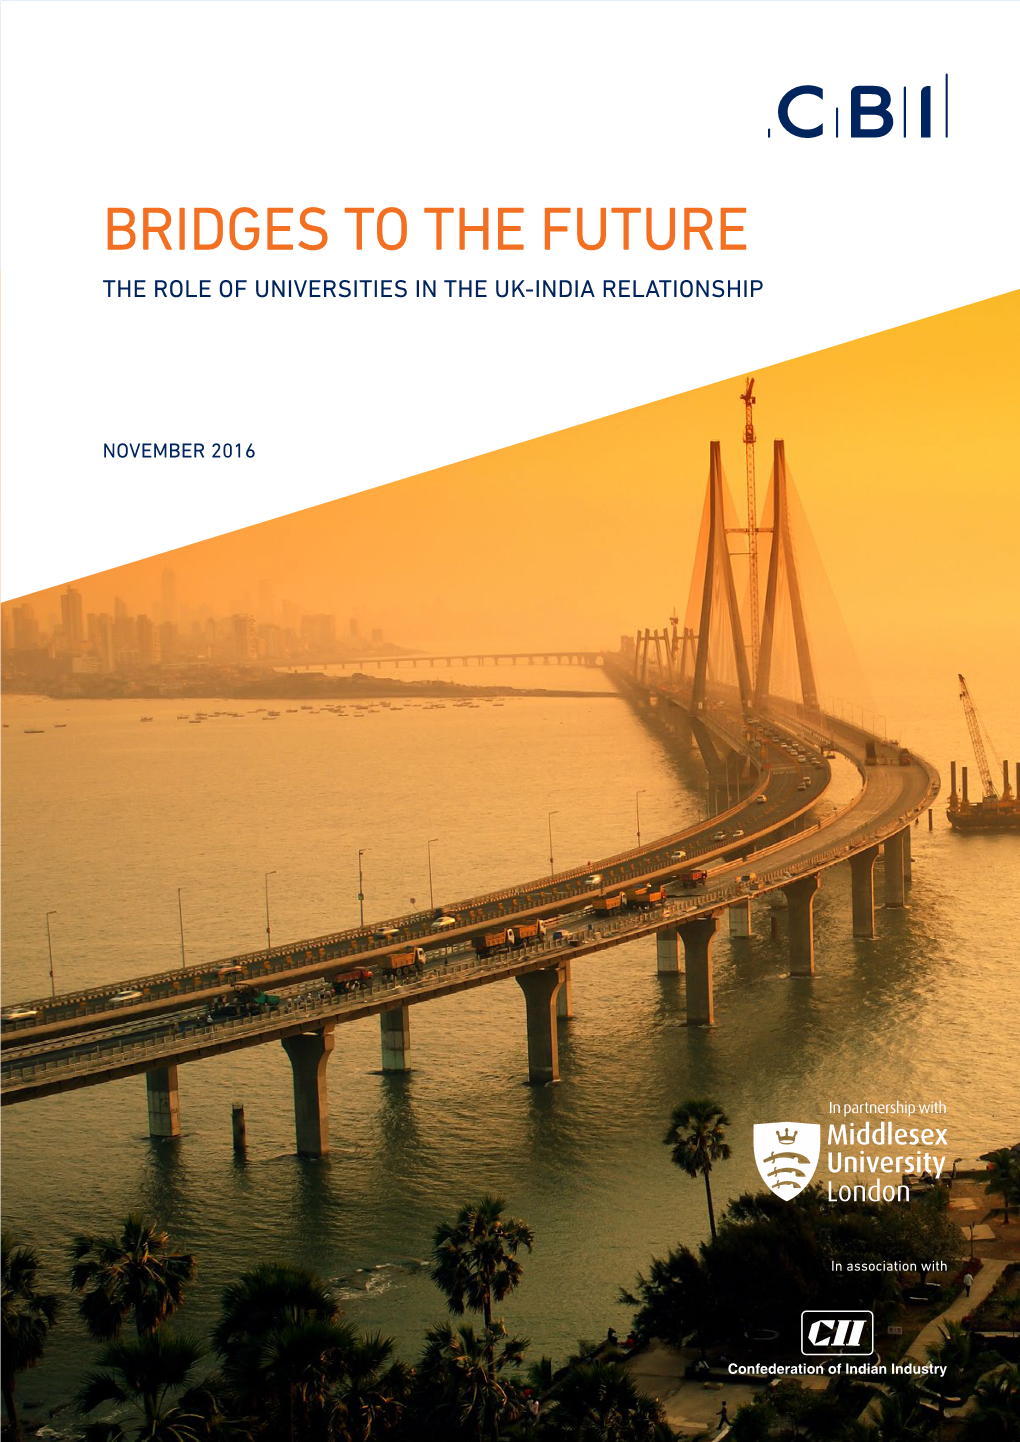 Bridges to the Future the Role of Universities in the Uk-India Relationship